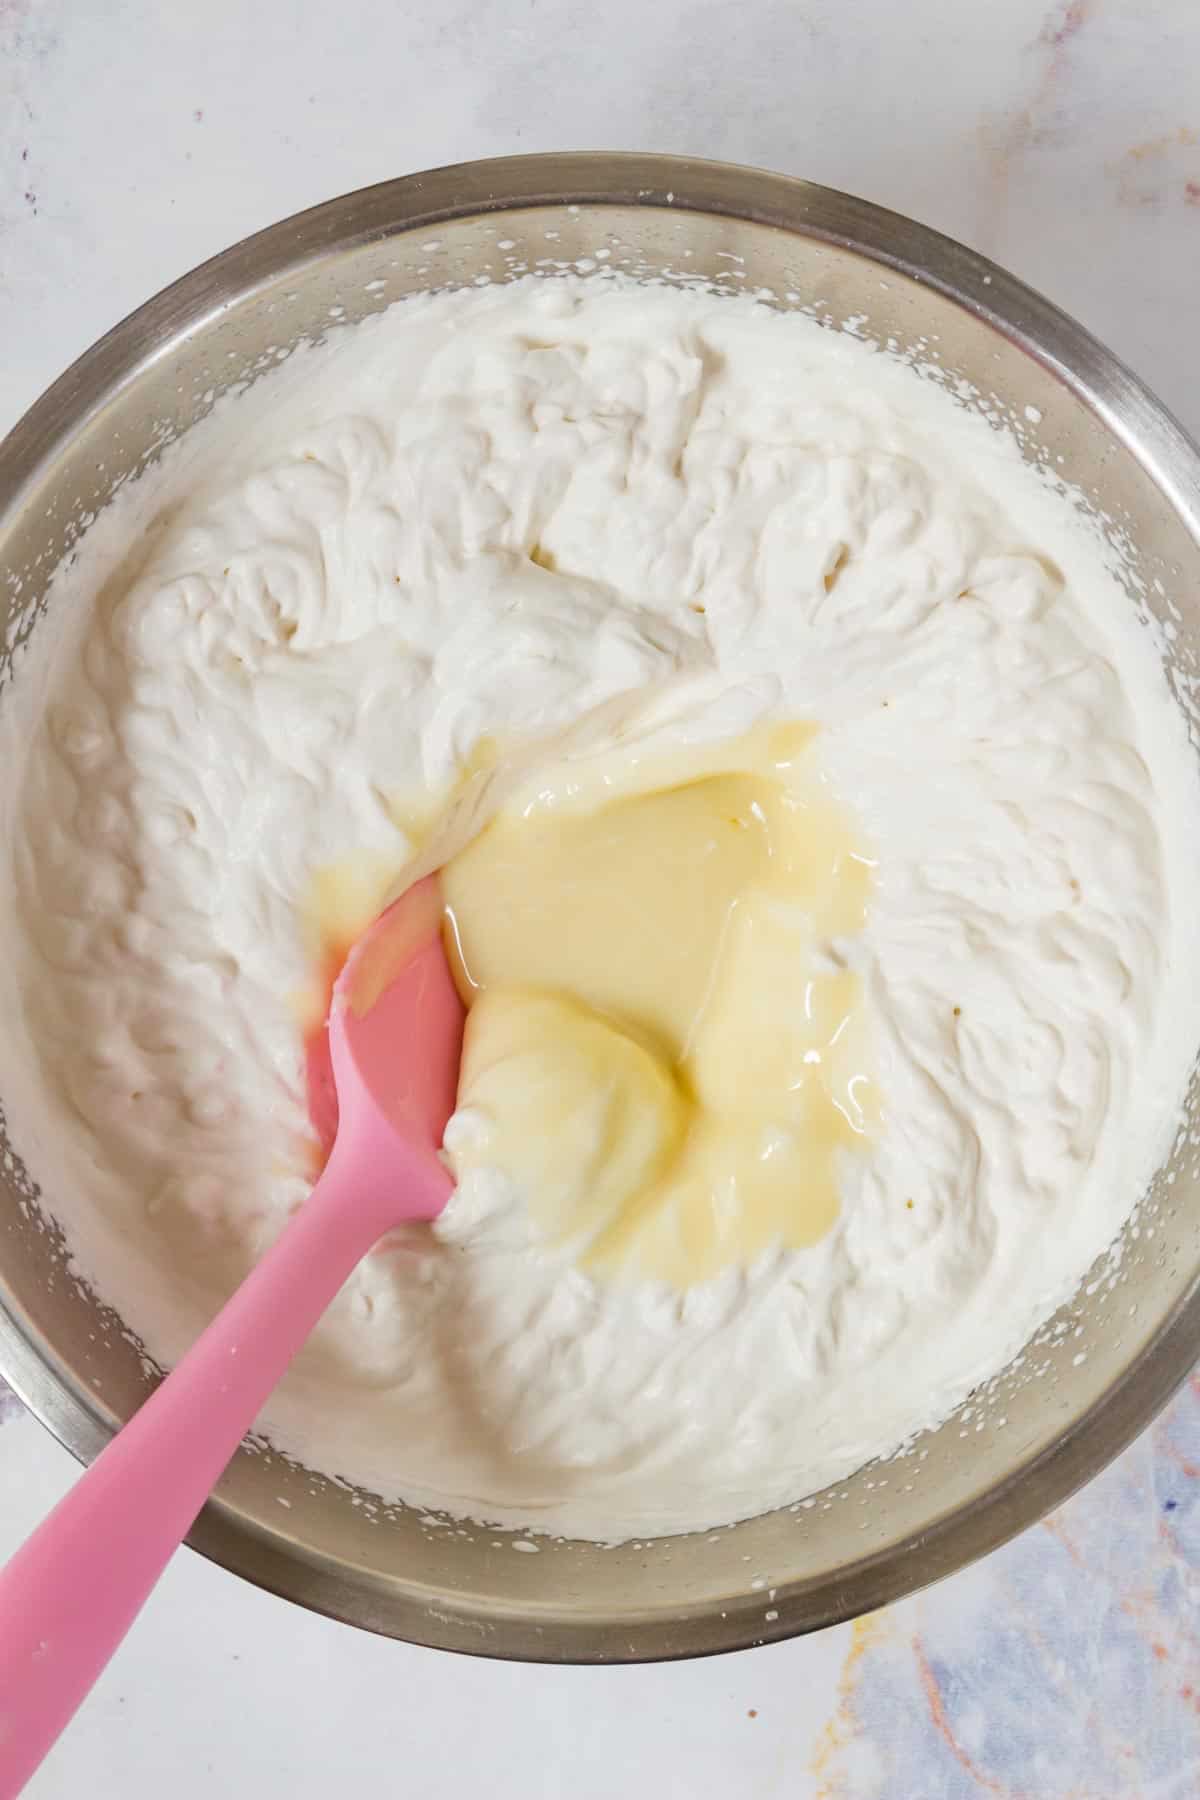 Condensed milk is stirred into whipping cream in a mixing bowl.